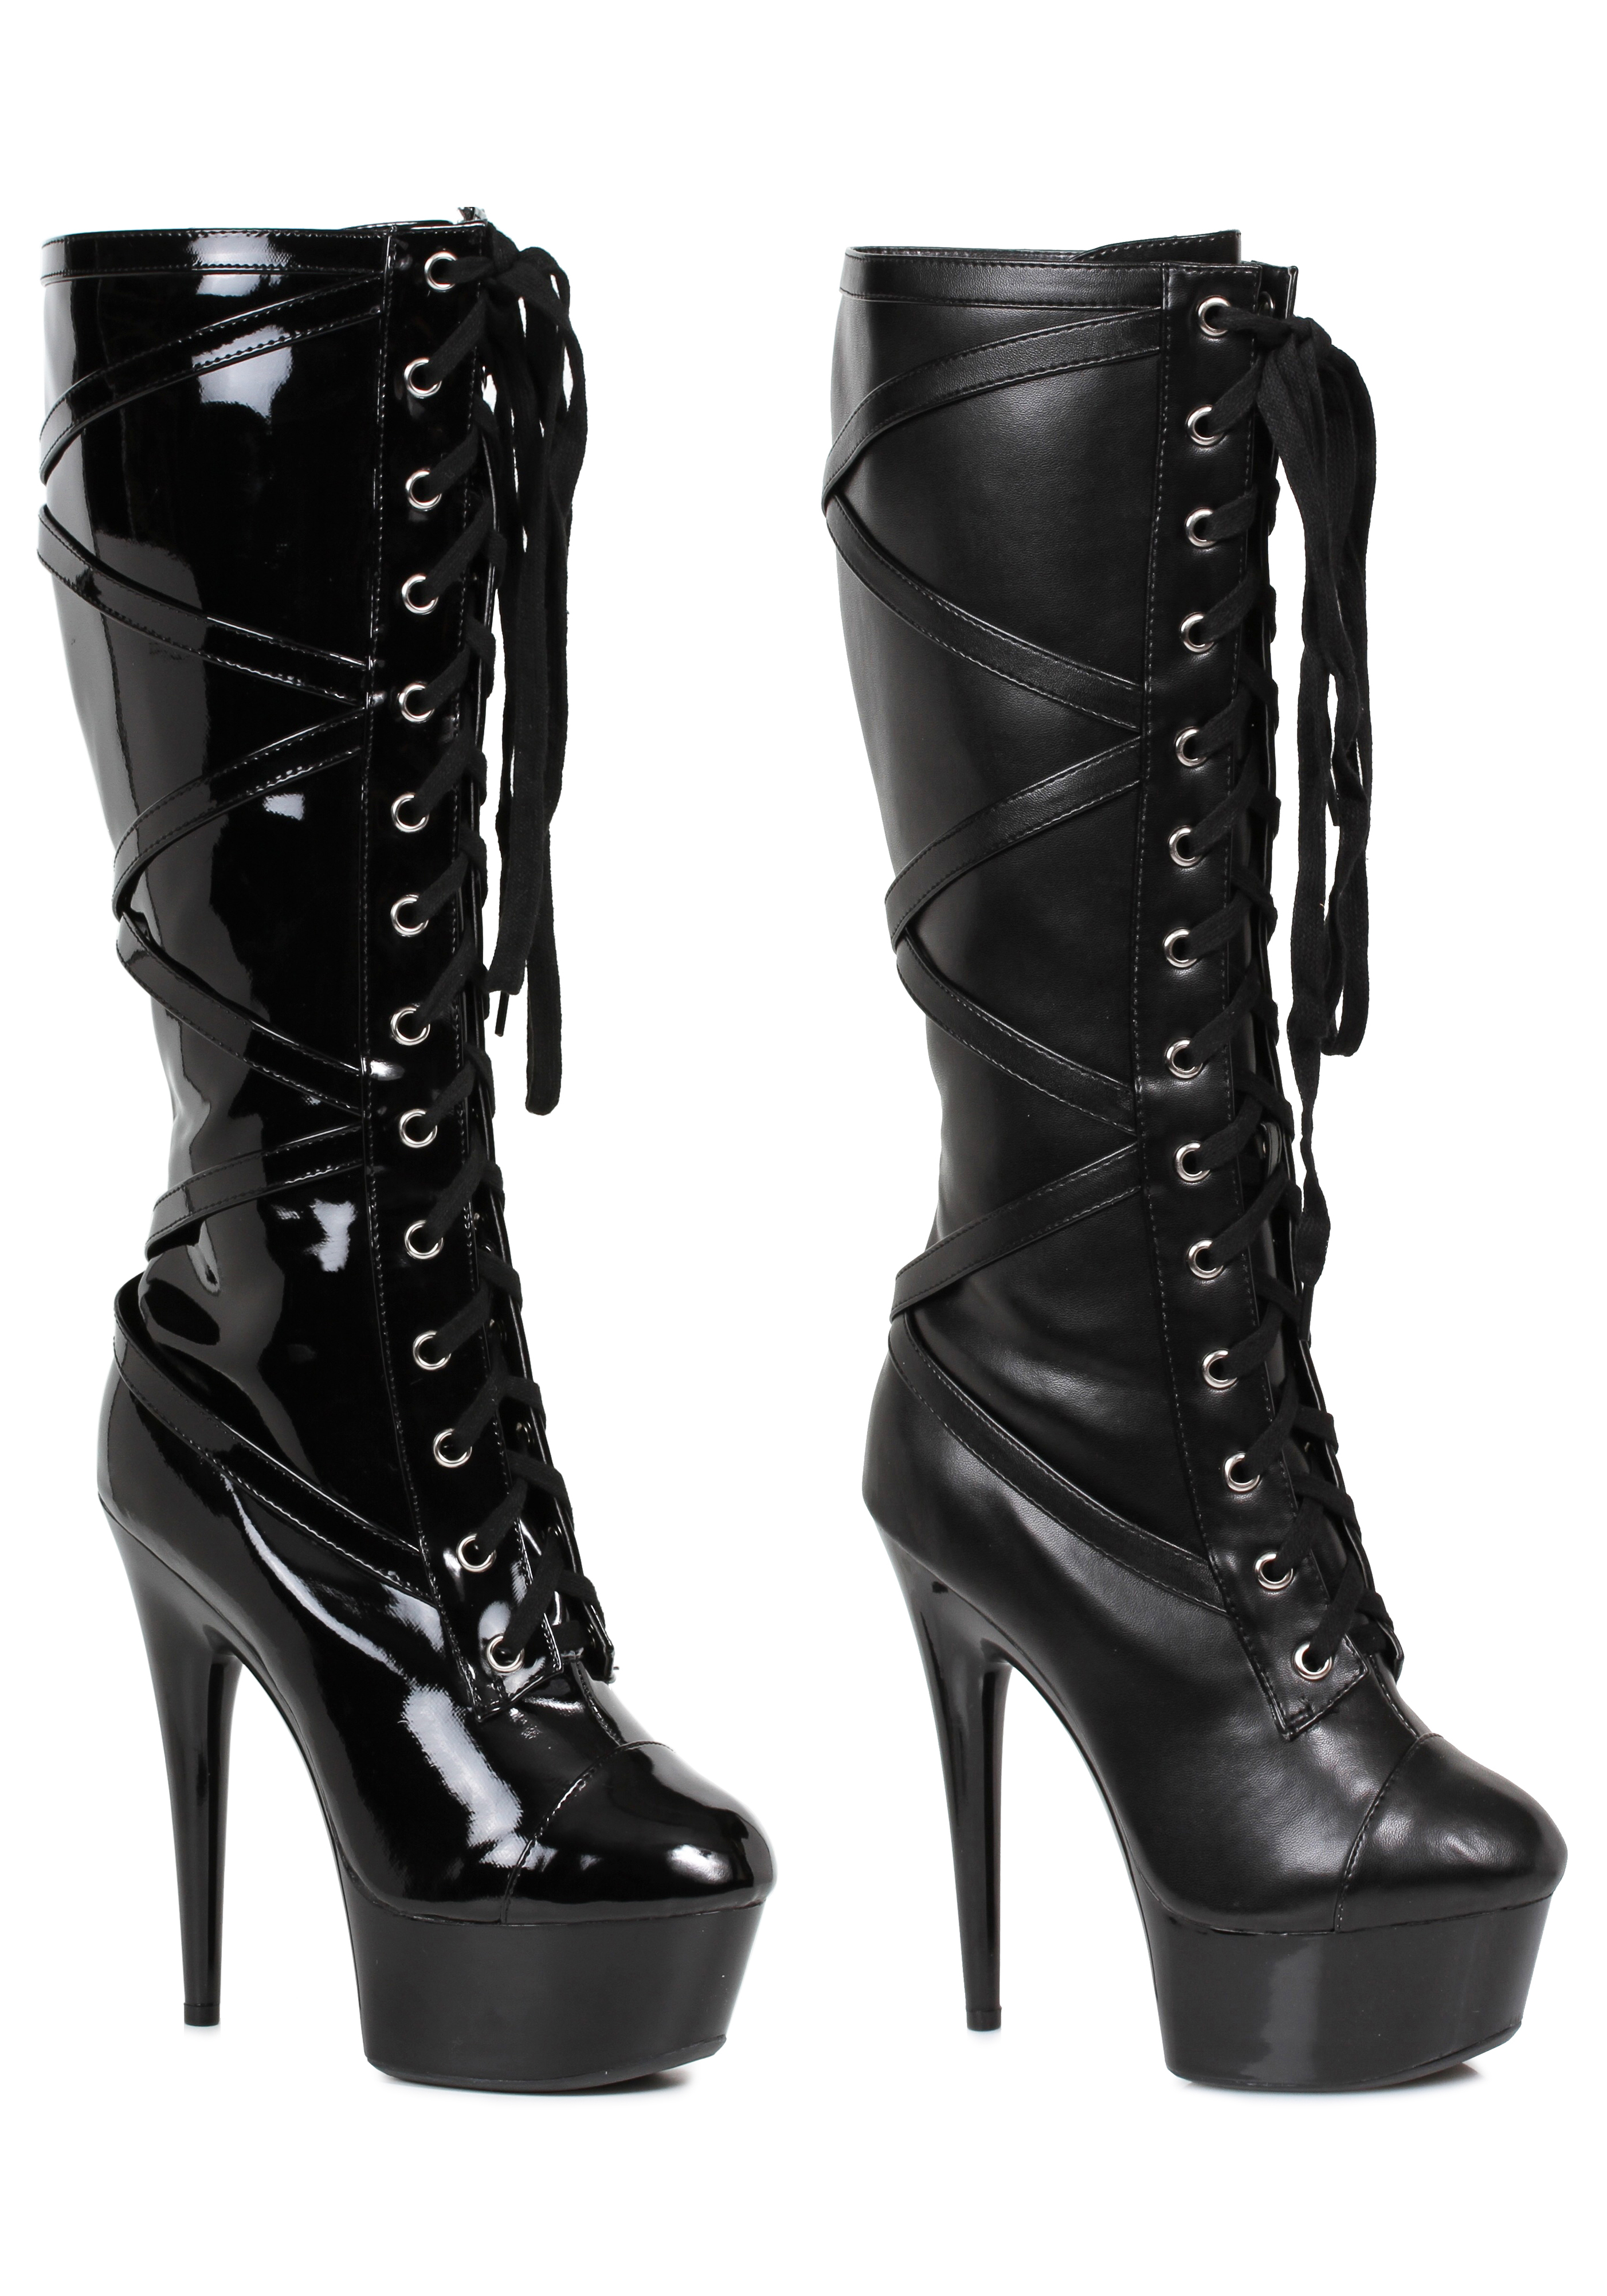 6 inch lace up boots